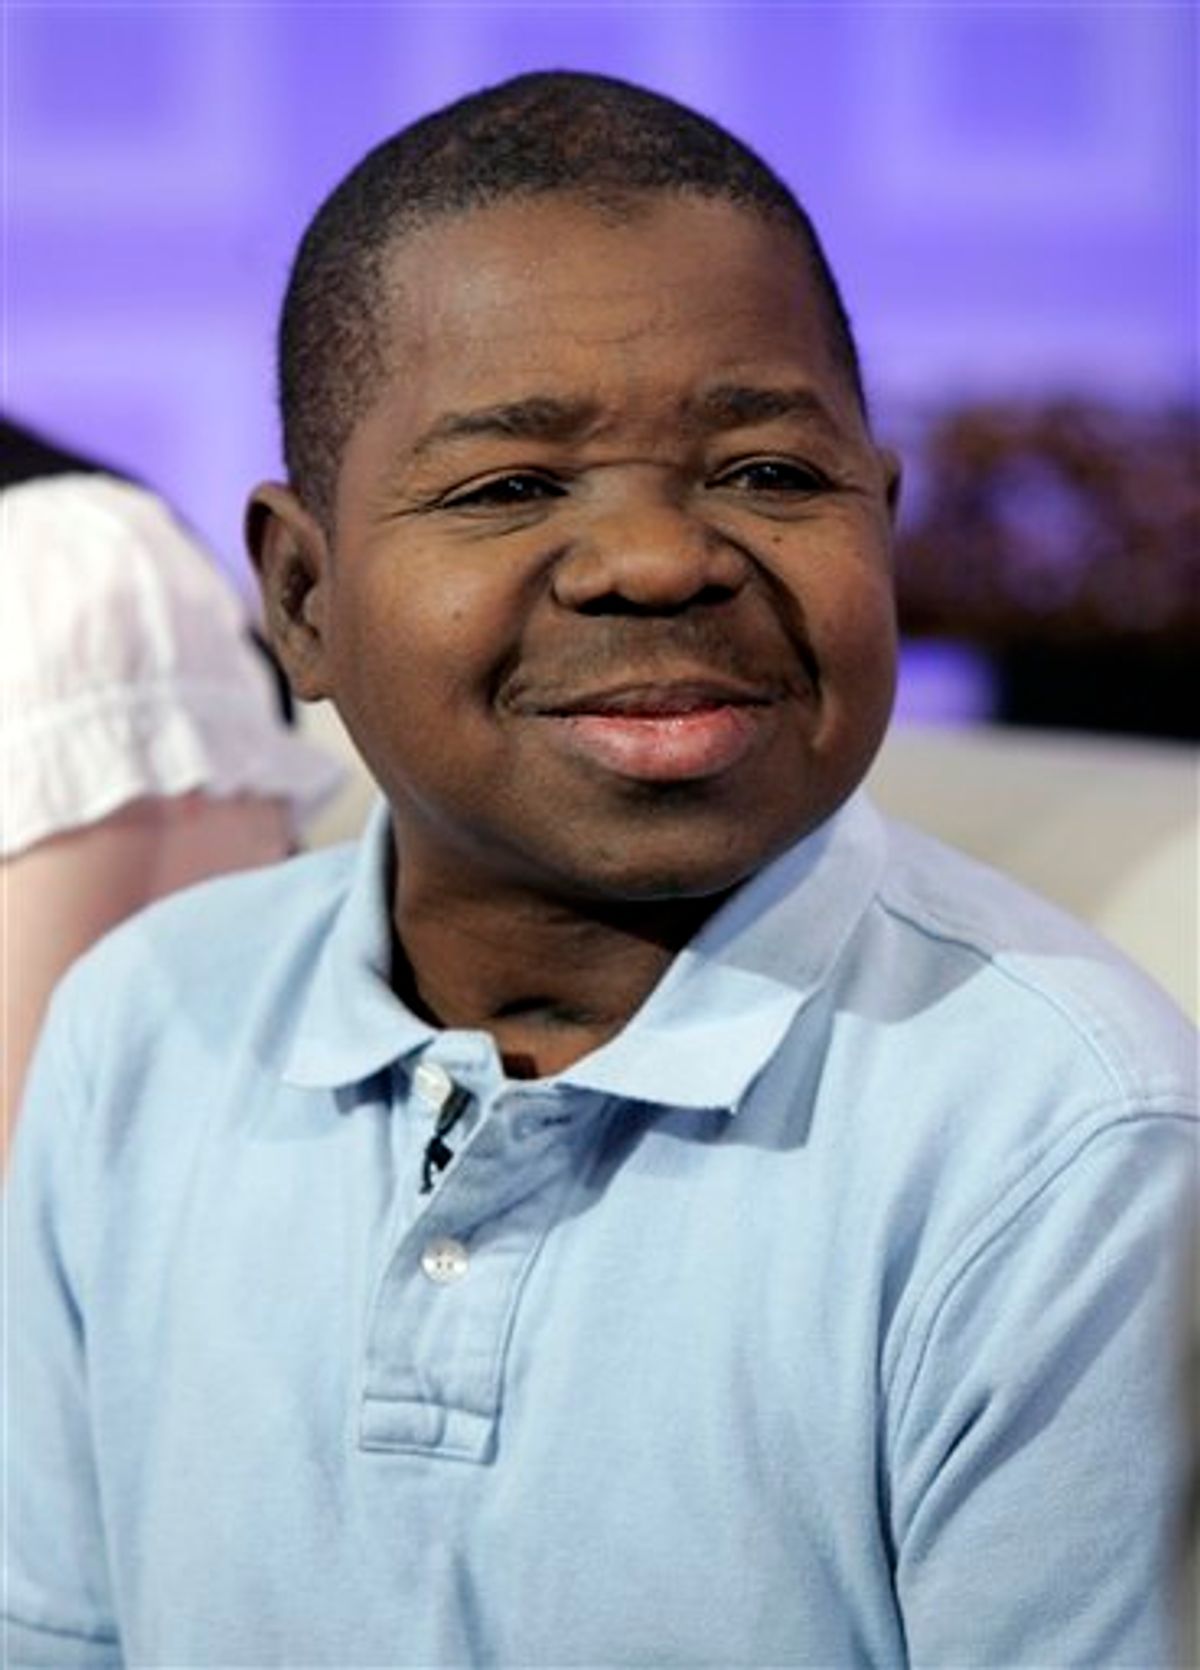 FILE - In this Feb. 26, 2008 file photo, actor Gary Coleman appears on the the NBC "Today" program in New York.  A Utah hospital says said Thursday May 27, 2010 that former child television star Gary Coleman has been admitted in critical condition.(AP Photo/Richard Drew) (AP)